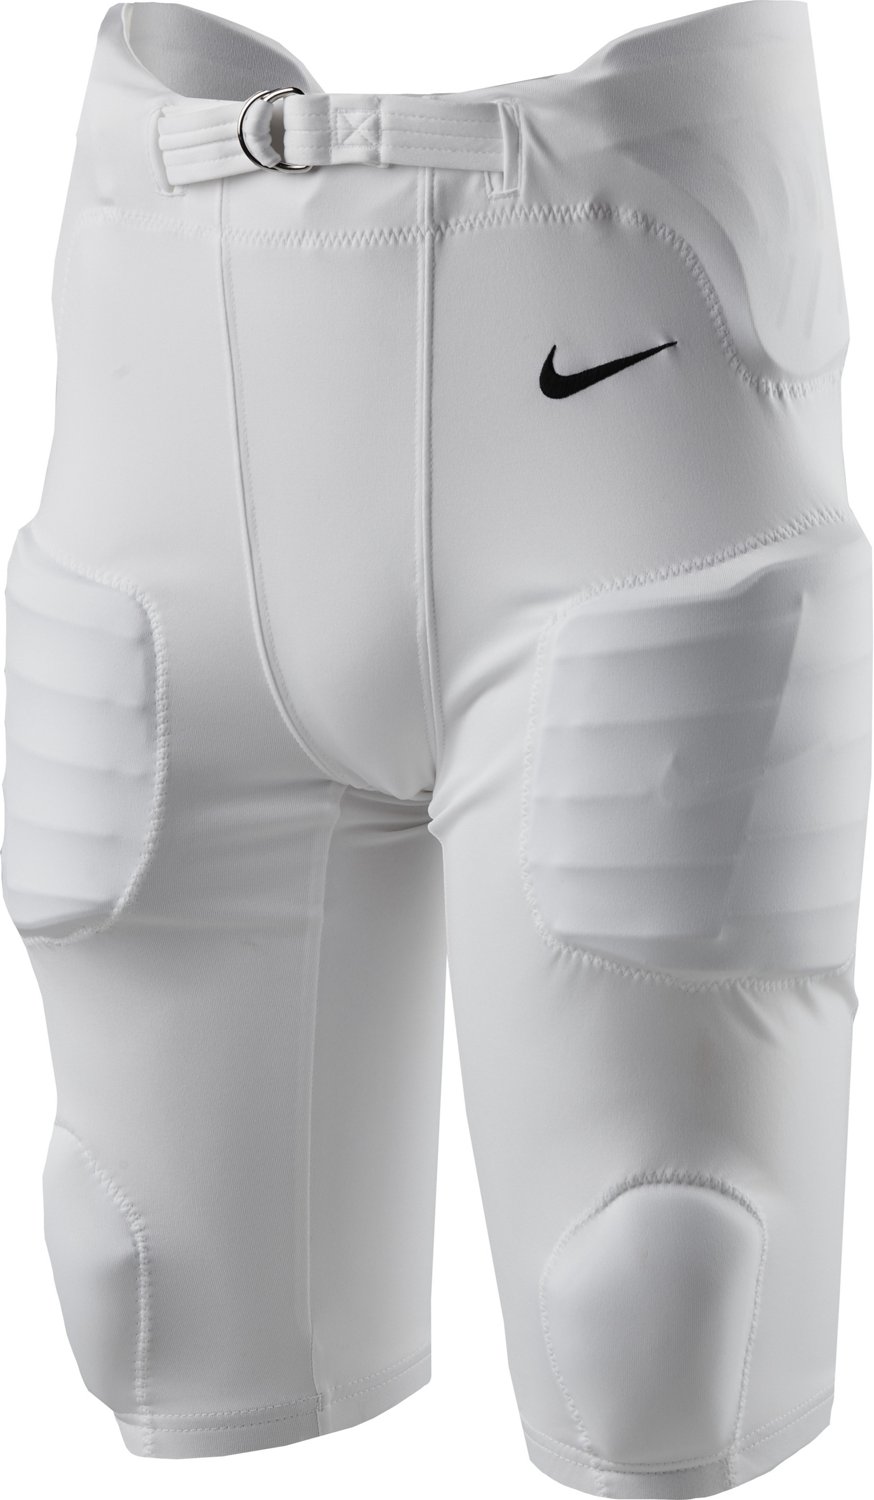 flaco Relativamente enlace Nike Youth Football Pants Discount, SAVE 54% - aveclumiere.com